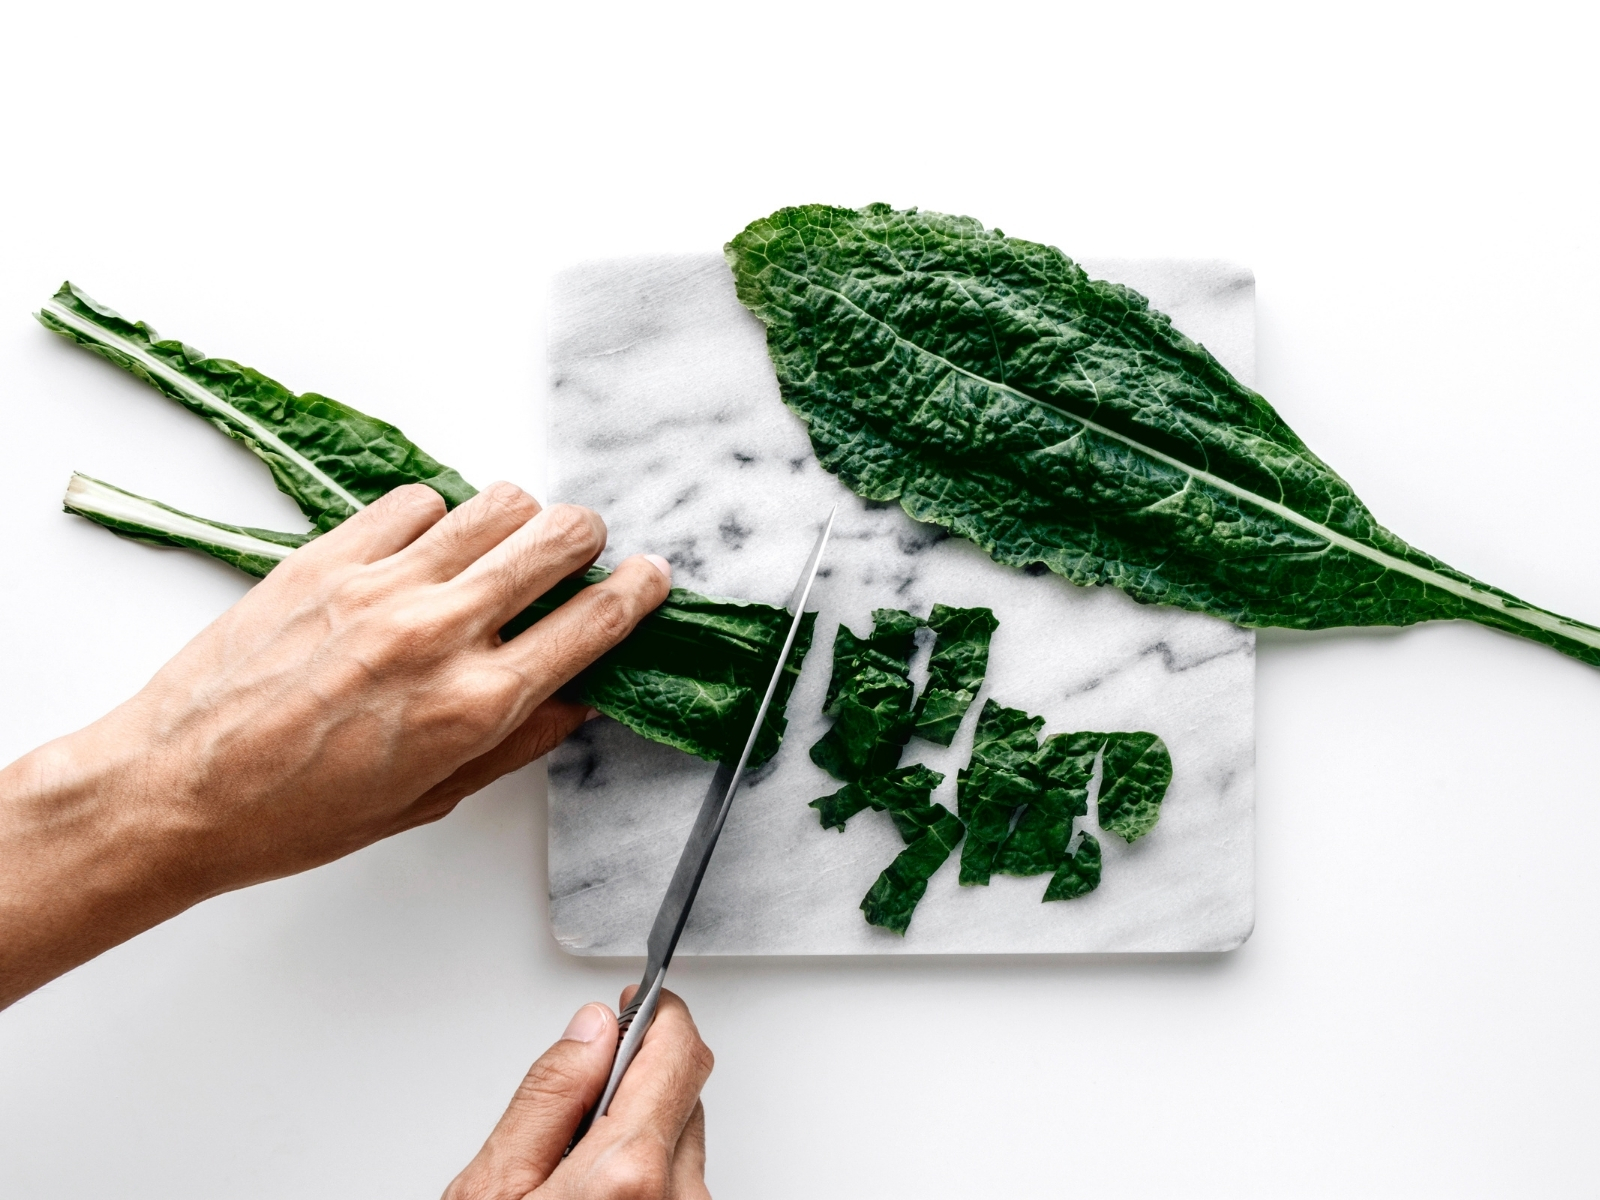 man's hands chopping kale on a marble cutting board